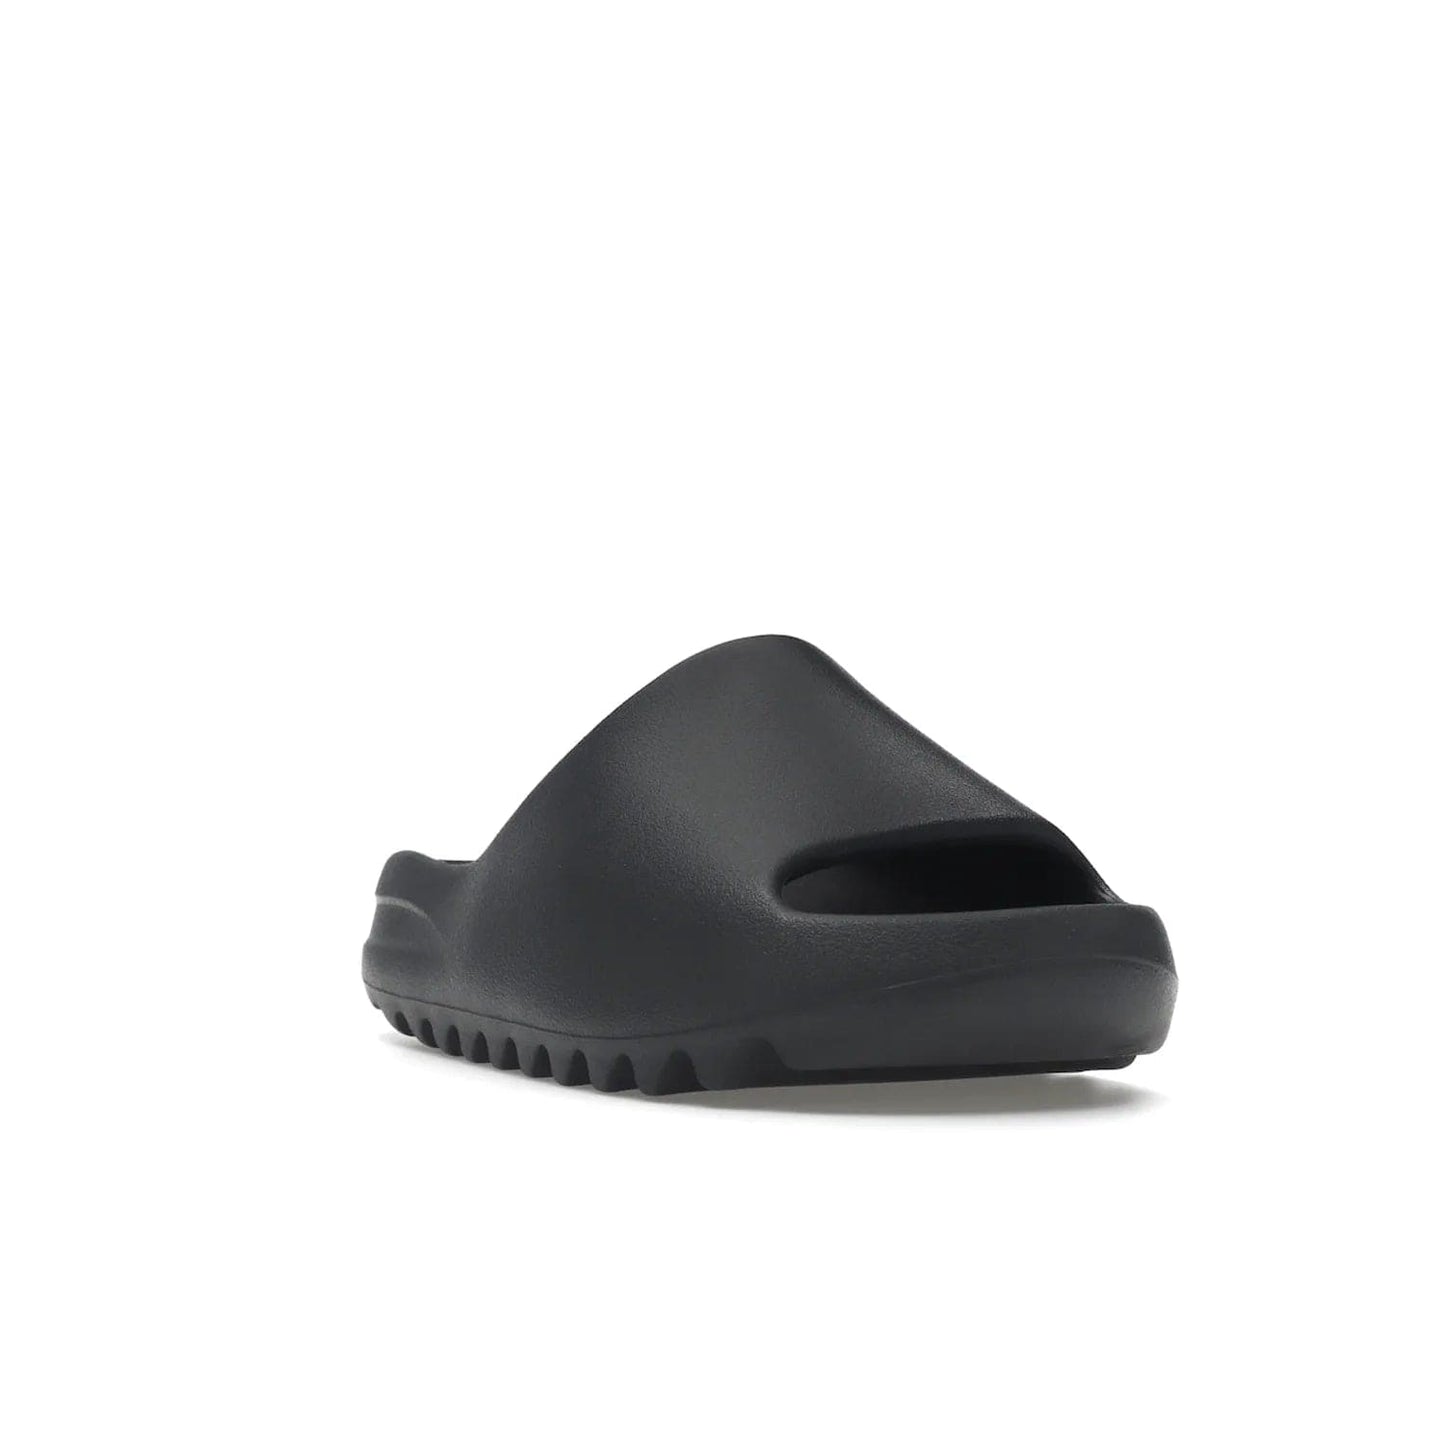 adidas Yeezy Slide Slate Grey - Image 7 - Only at www.BallersClubKickz.com - Stylish & comfortable adidas Yeezy Slide Slate Grey features an EVA foam upper, strategic cutouts, textured outsole pattern, & easy slip-on design for modern comfort & classic style.